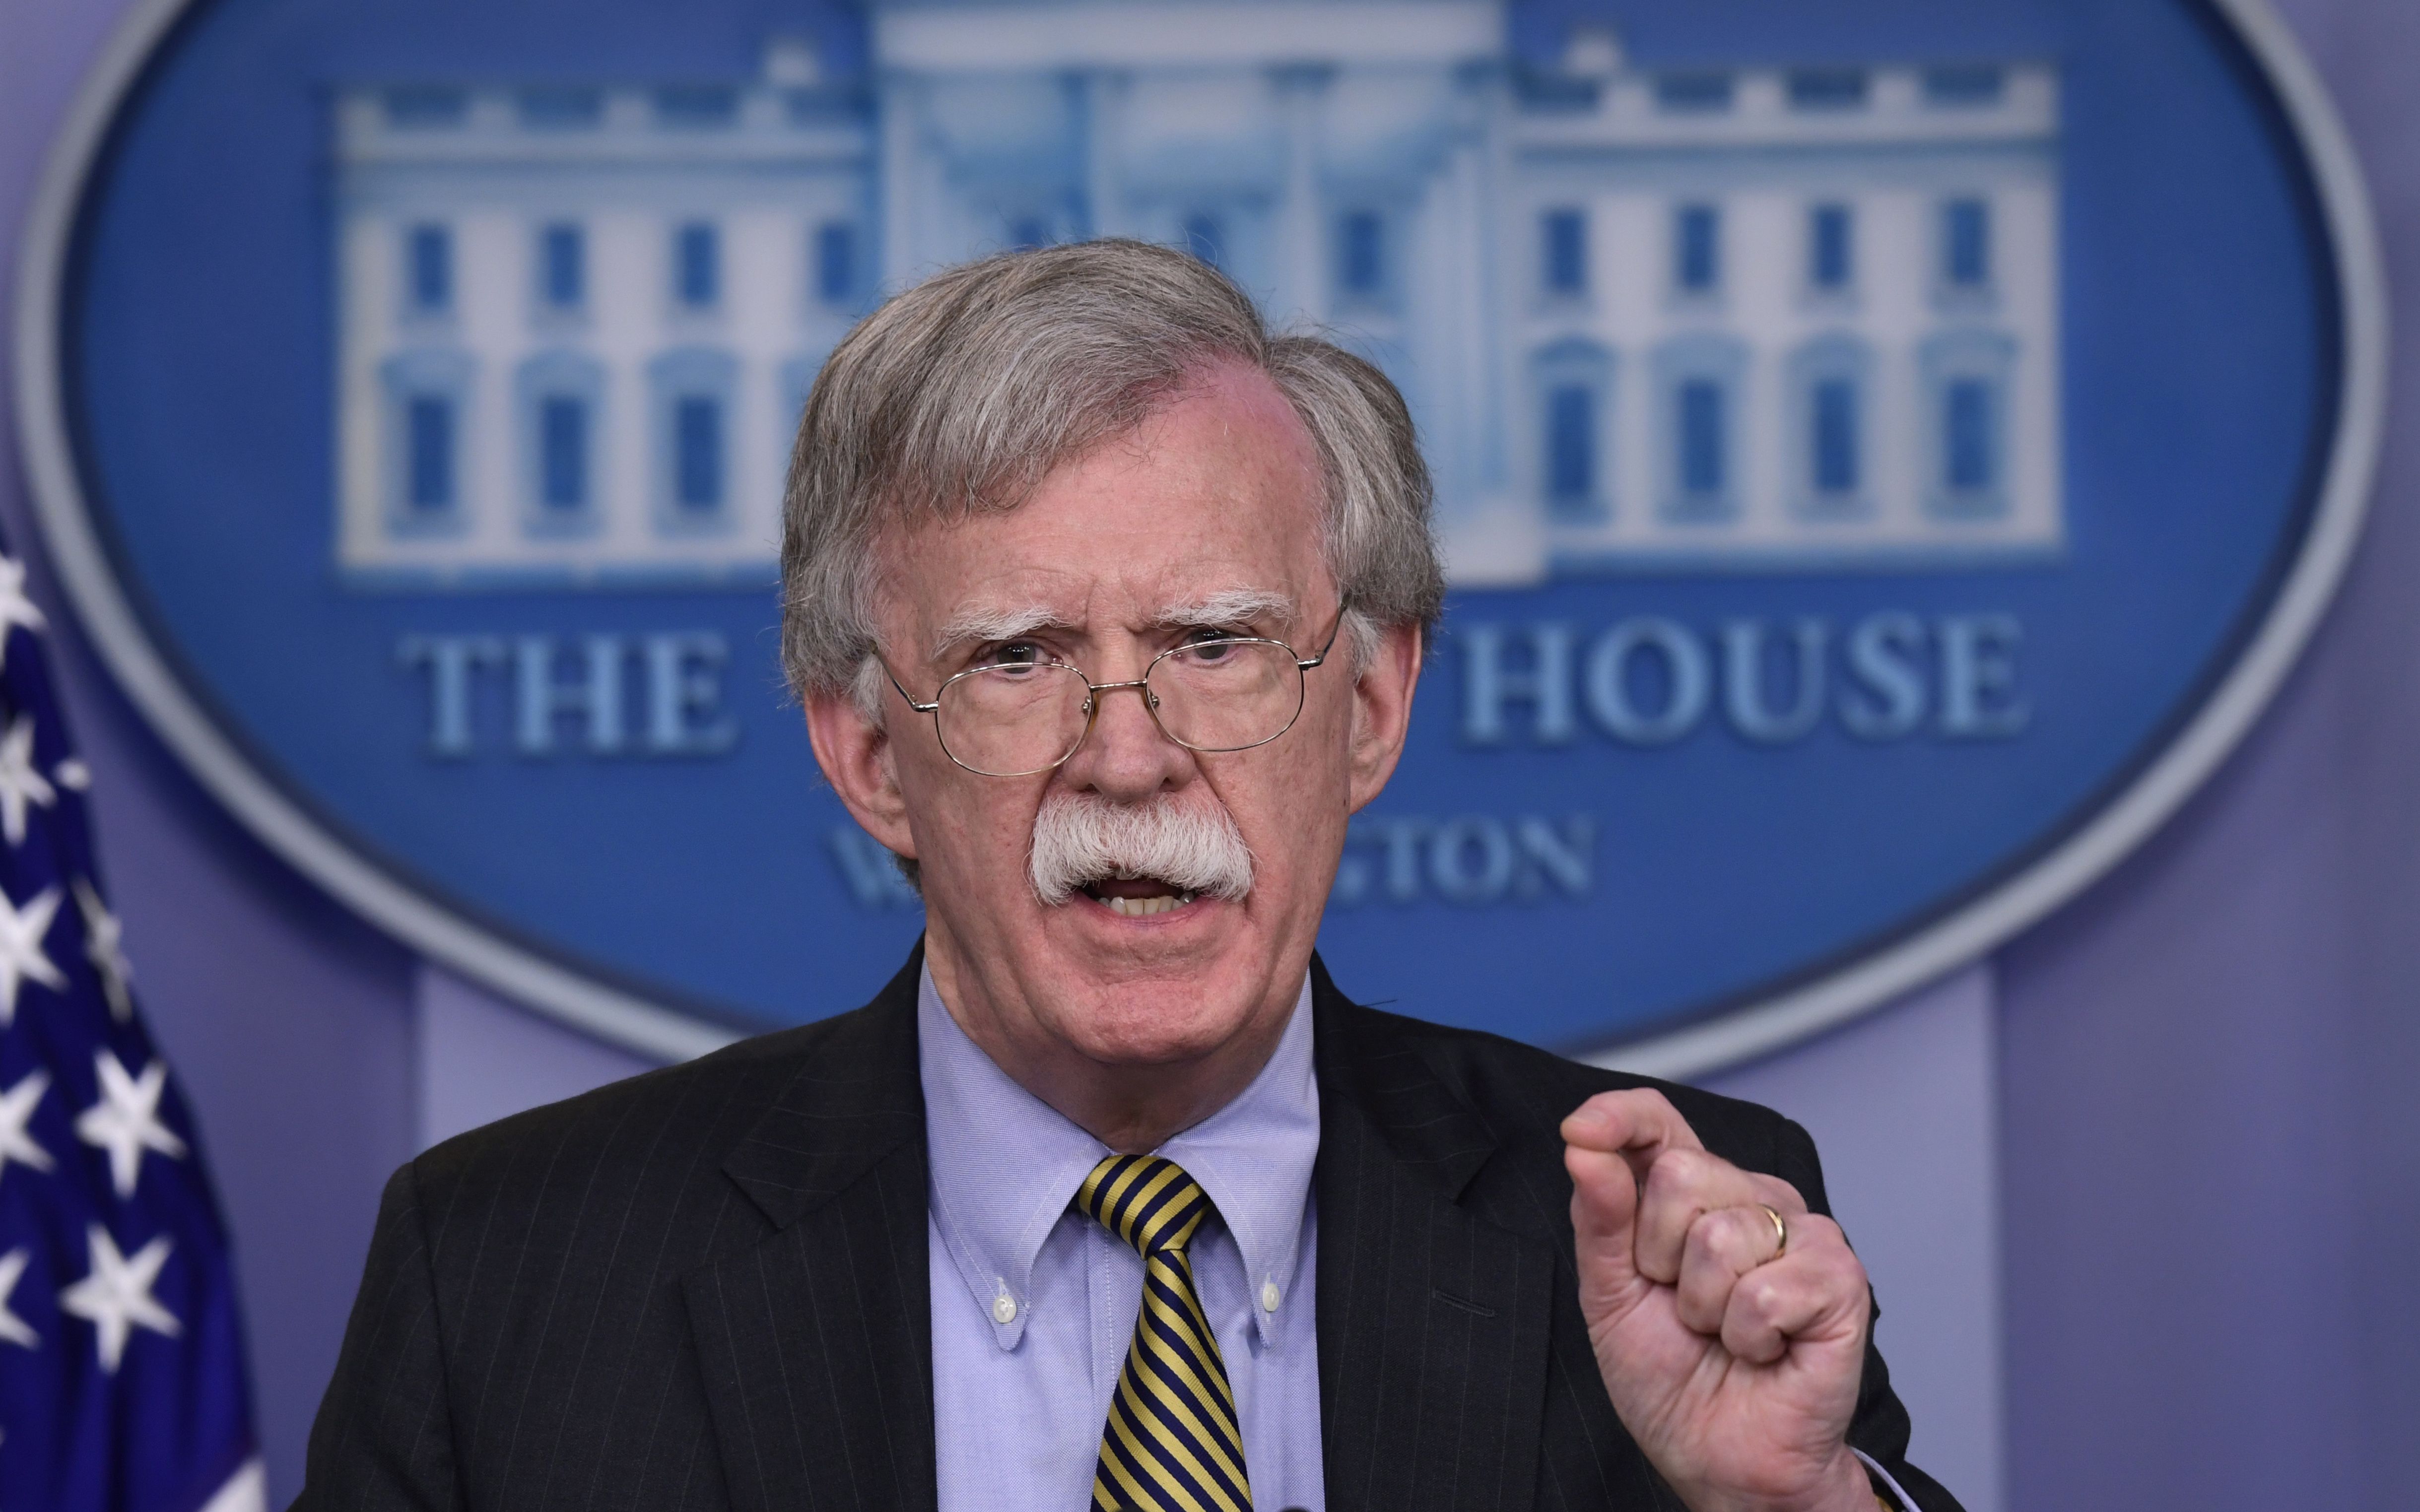 U.S. National Security Advisor John Bolton during a news conference, White House briefing room, Washington, October 3, 2018.